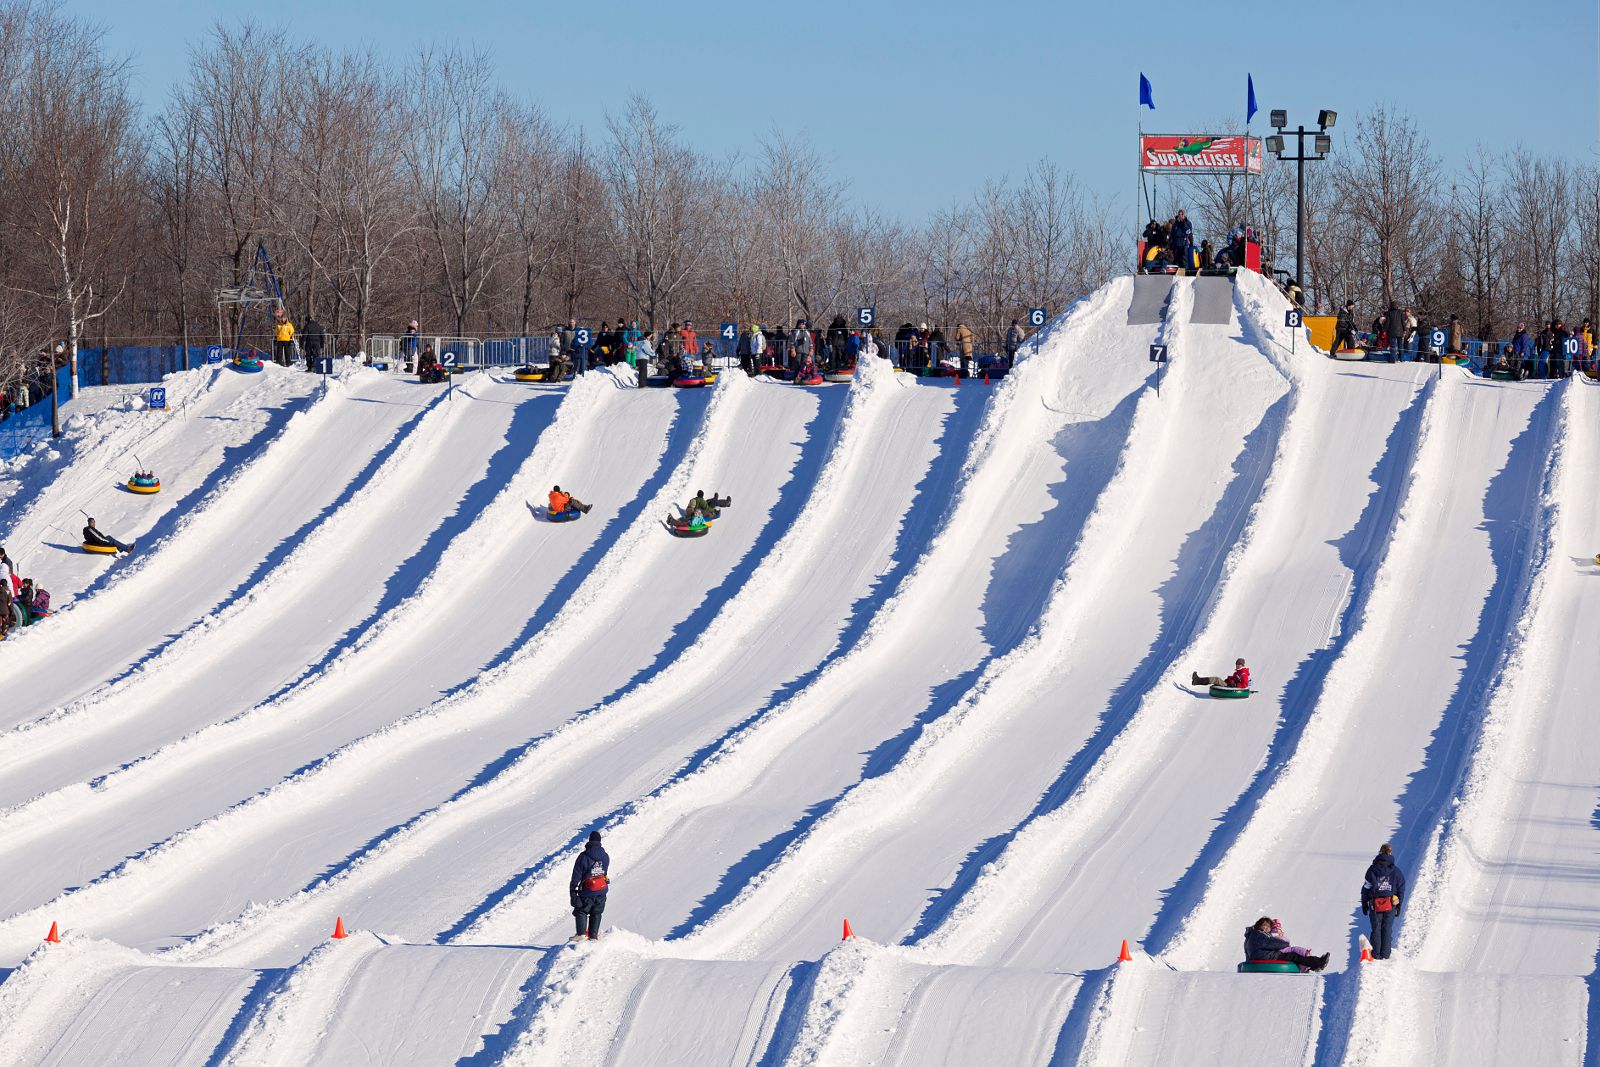 7 Montreal Snow Tubing Destinations to Try in 2017-2018